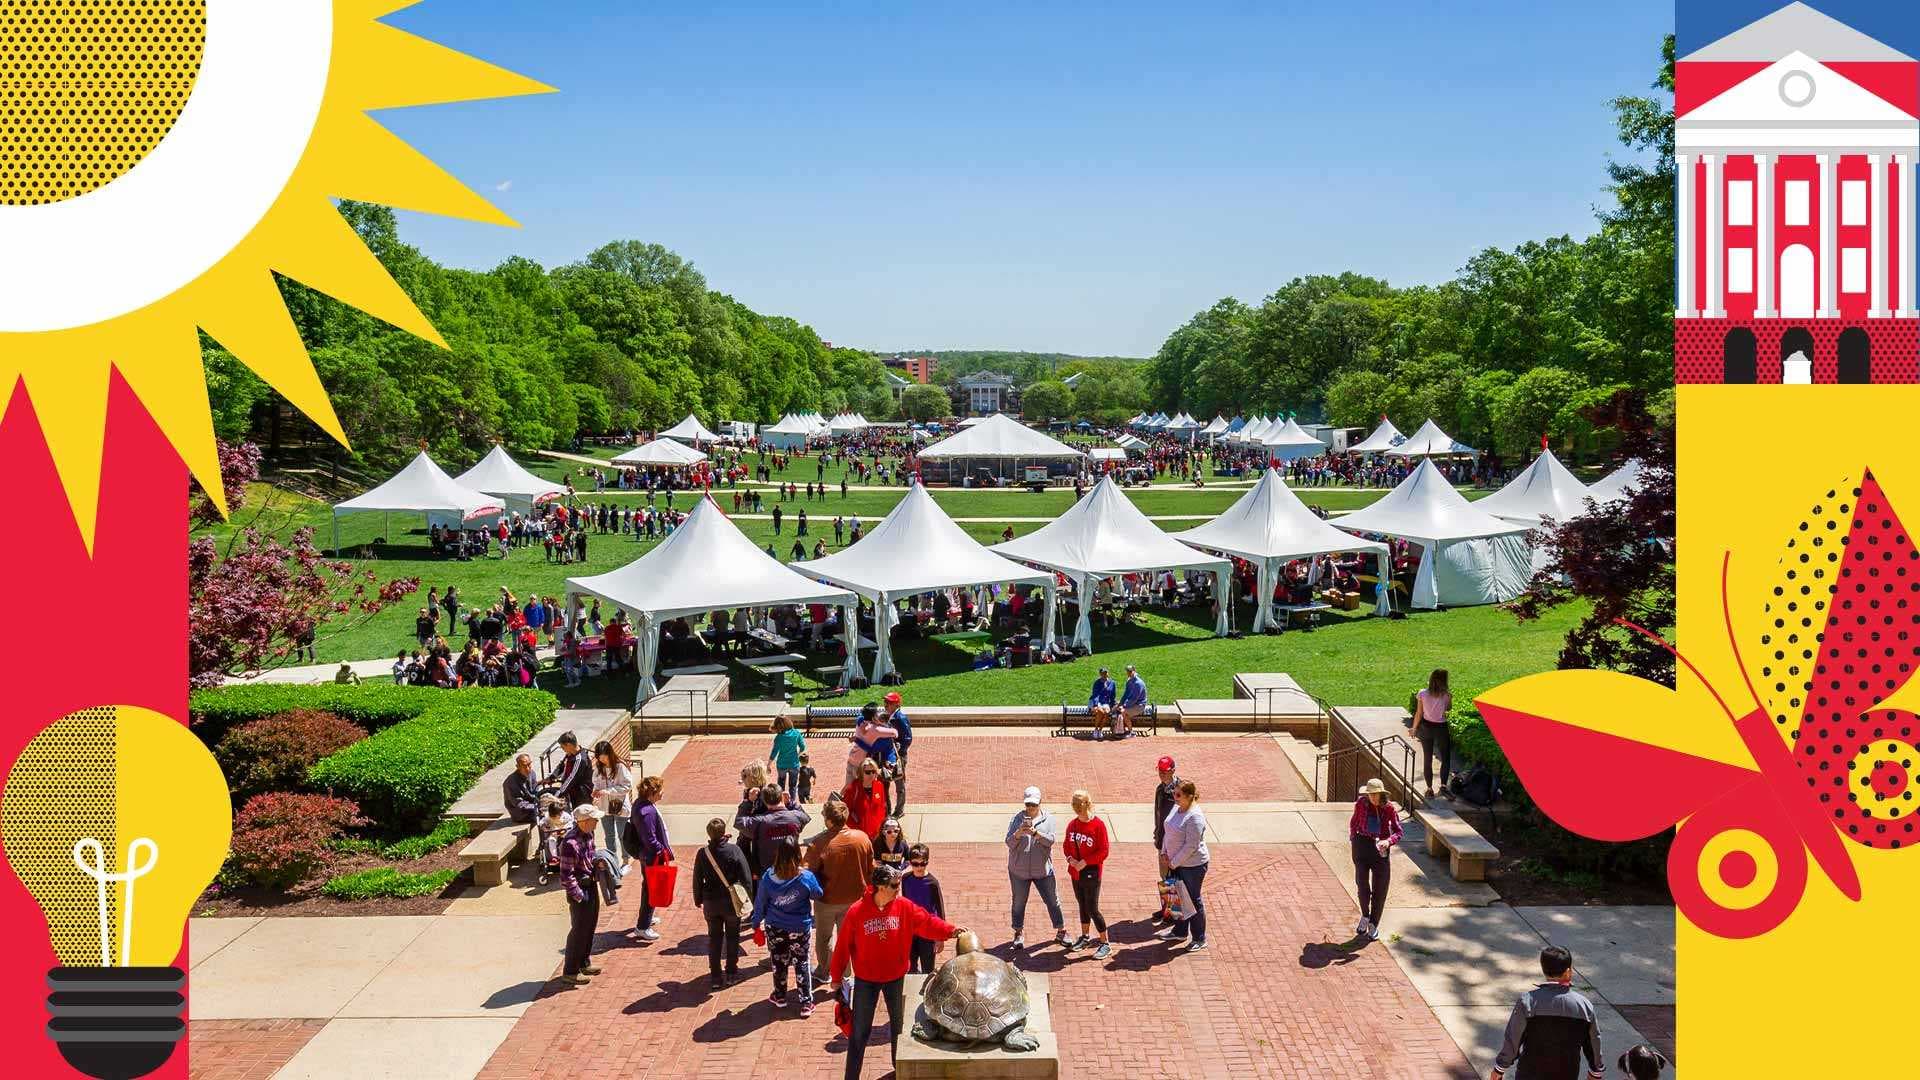 Maryland Day tents on McKeldin Mall surrounded by red and yellow illustrations of sun, lightbulb, academic building and butterfly